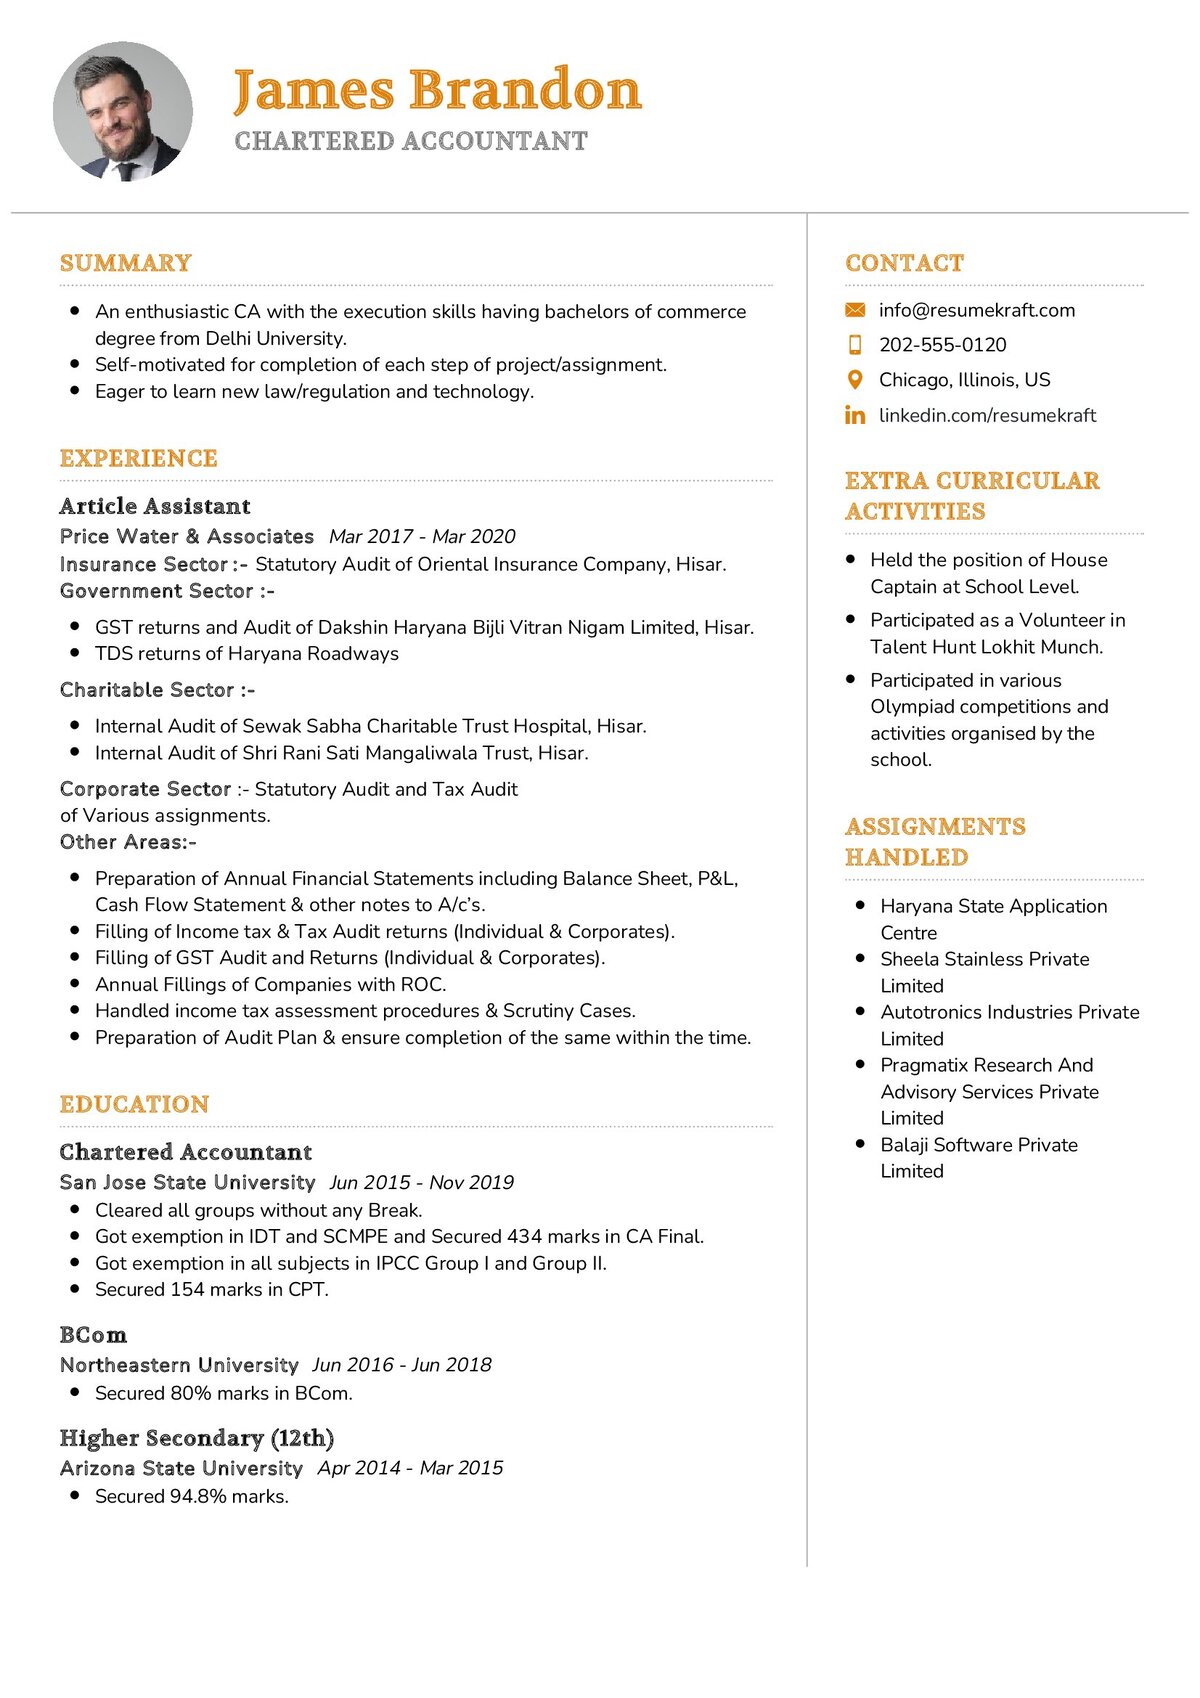 resume format for experienced chartered accountant